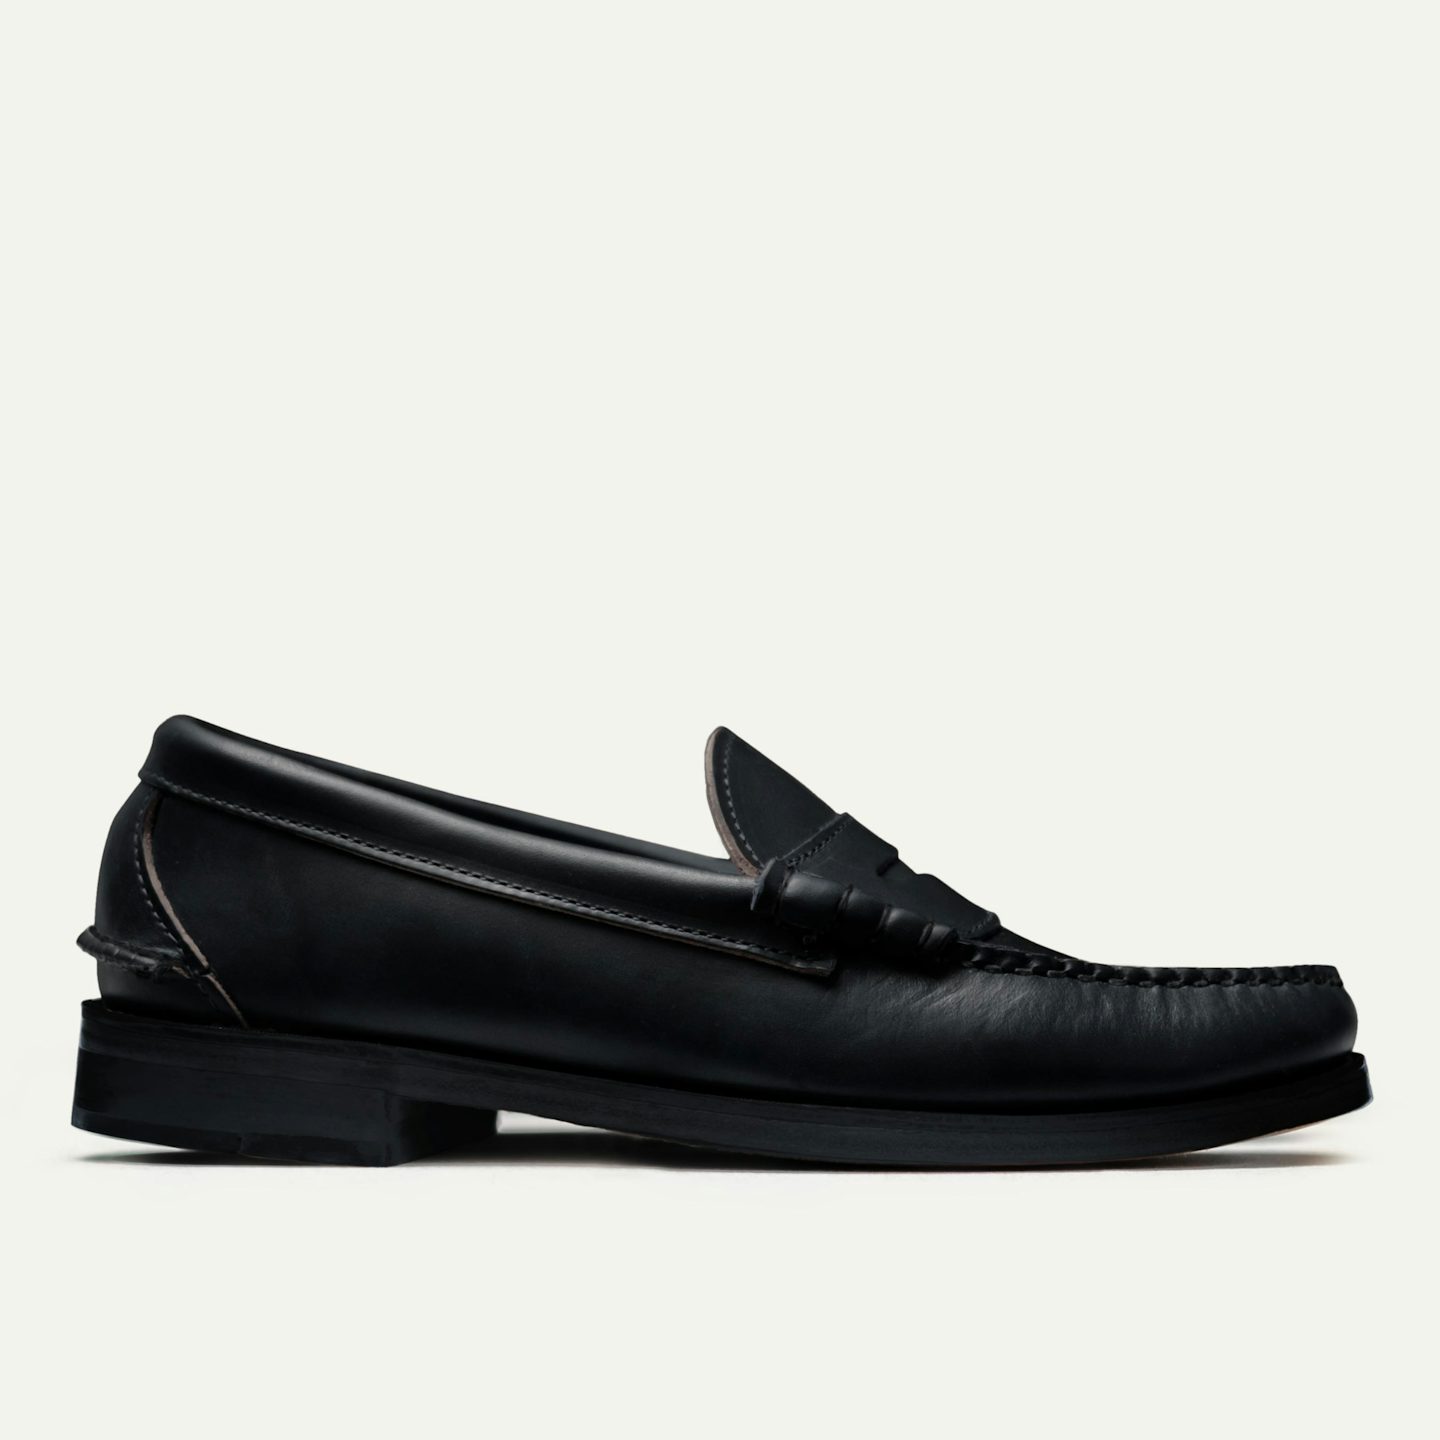 Beefroll Penny Loafer - Black Chromexcel, Leather Sole with